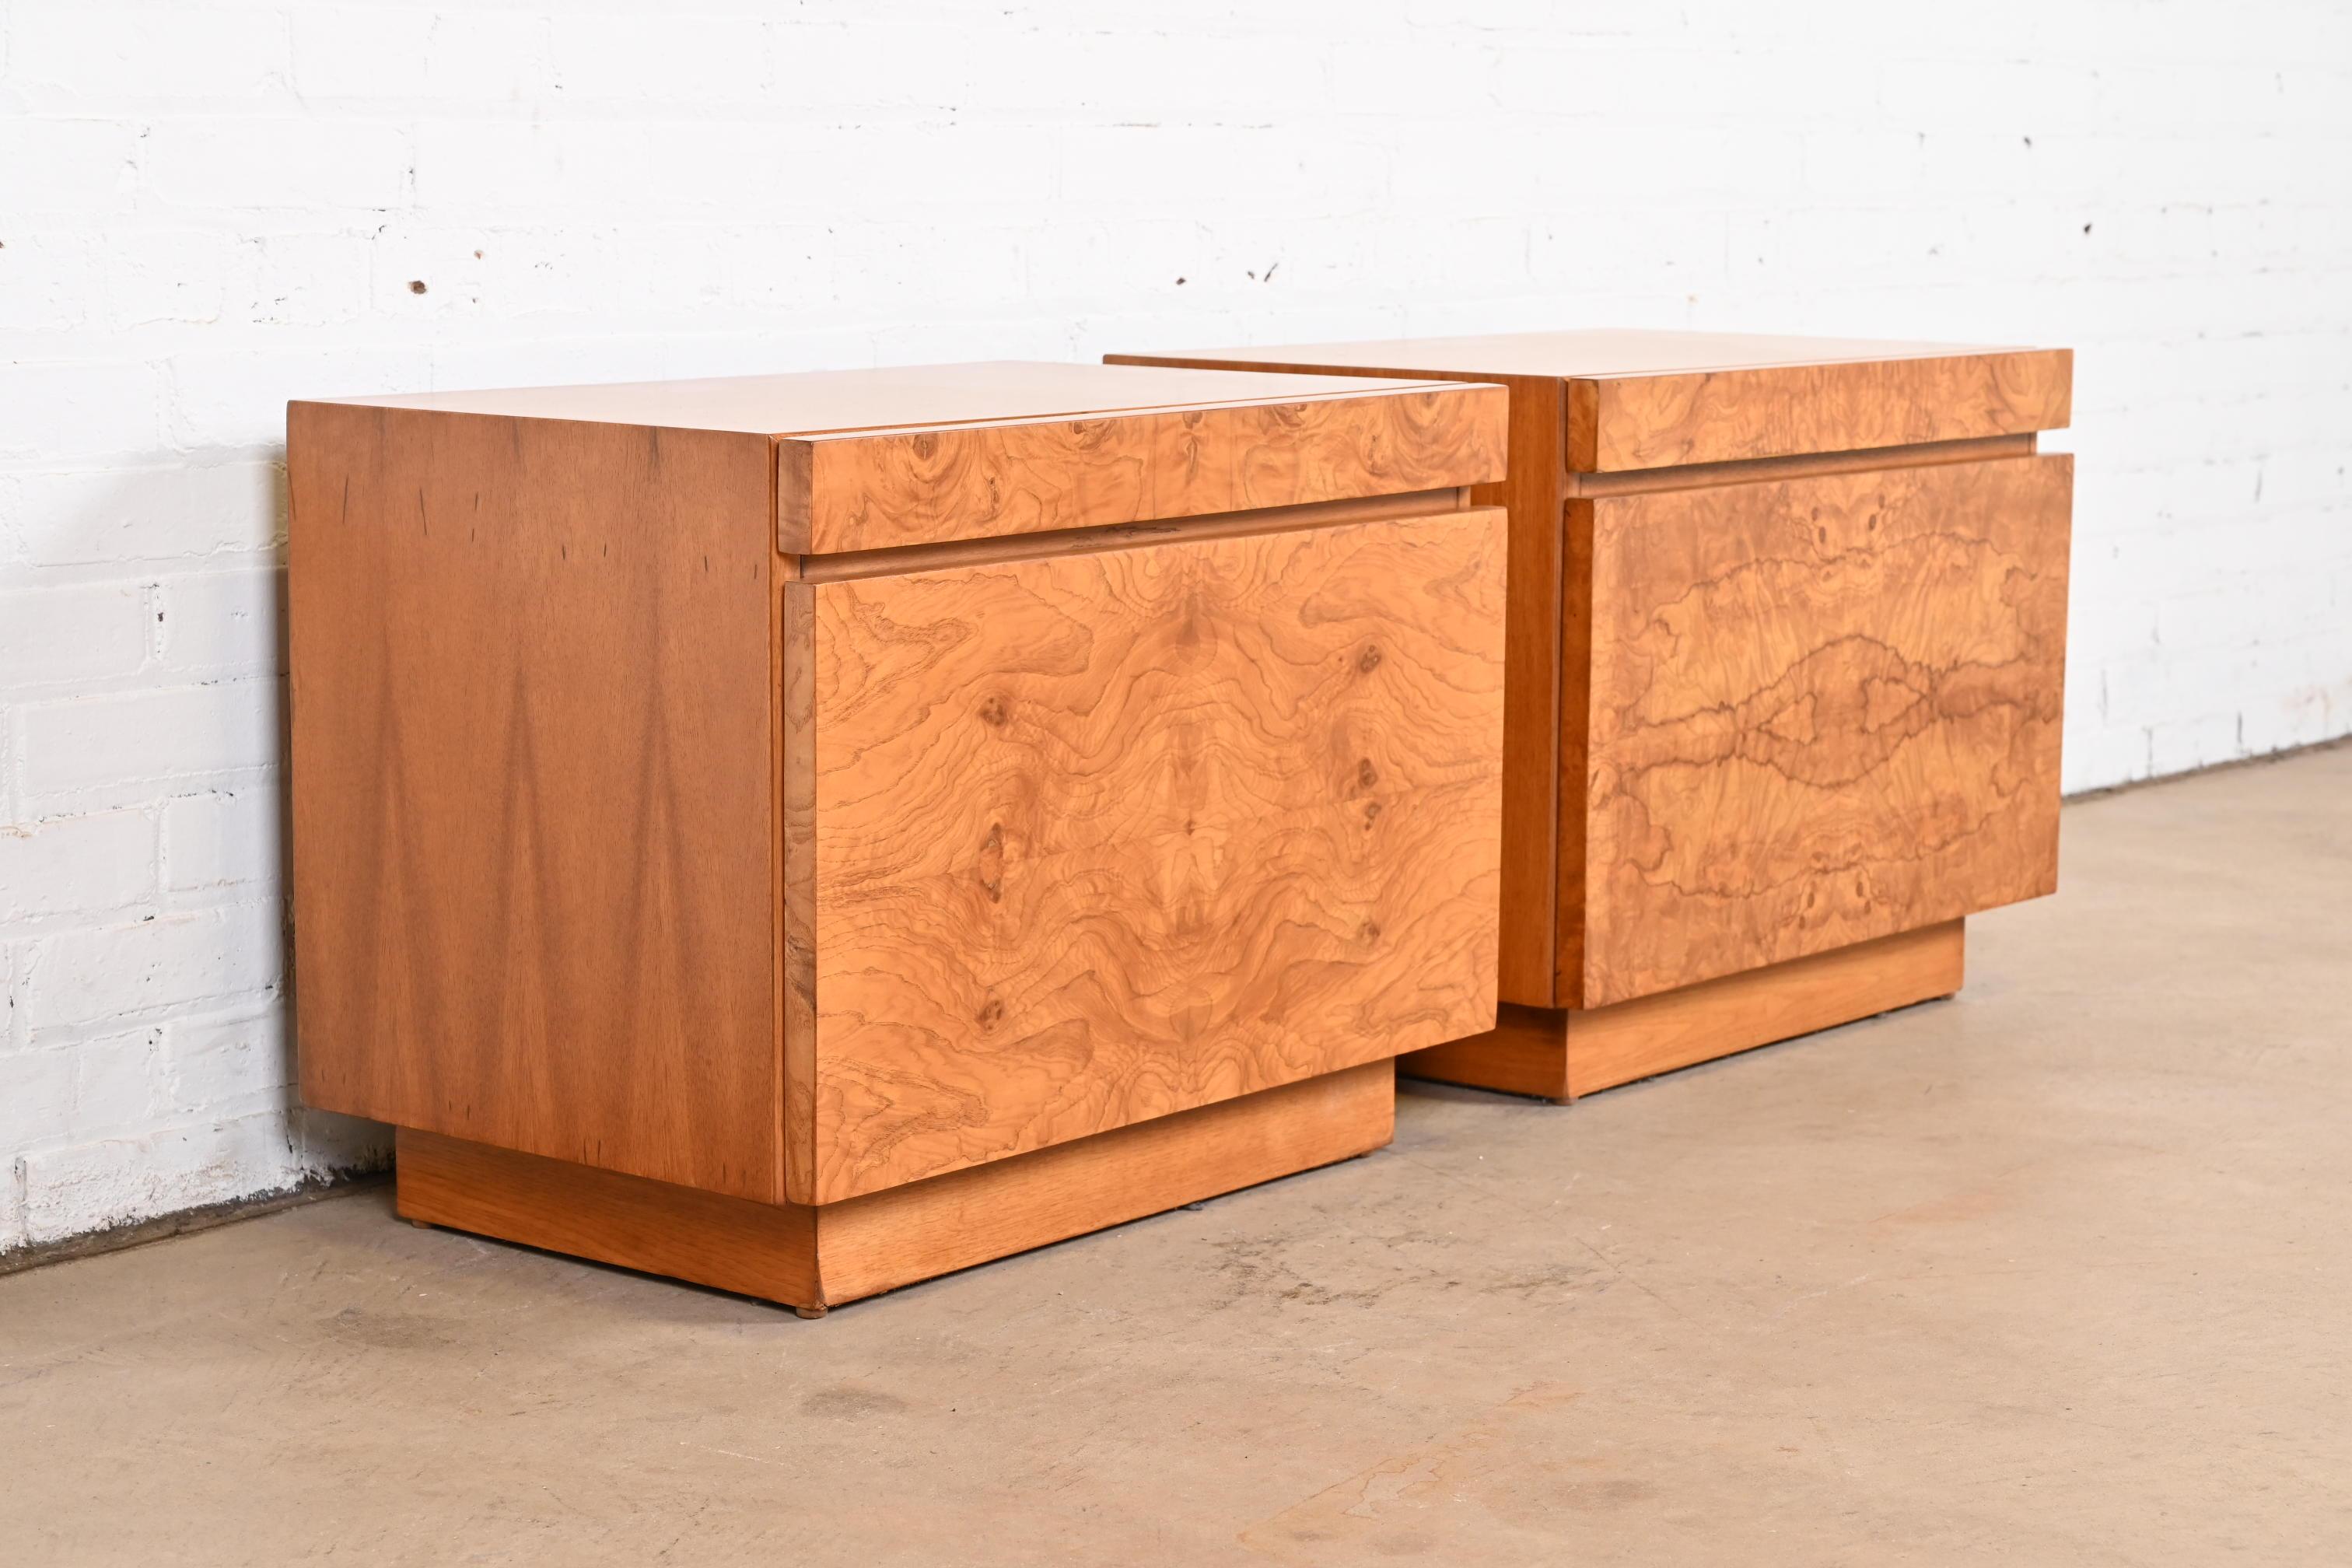 Milo Baughman Style Burl Wood Nightstands by Lane, Pair In Good Condition For Sale In South Bend, IN